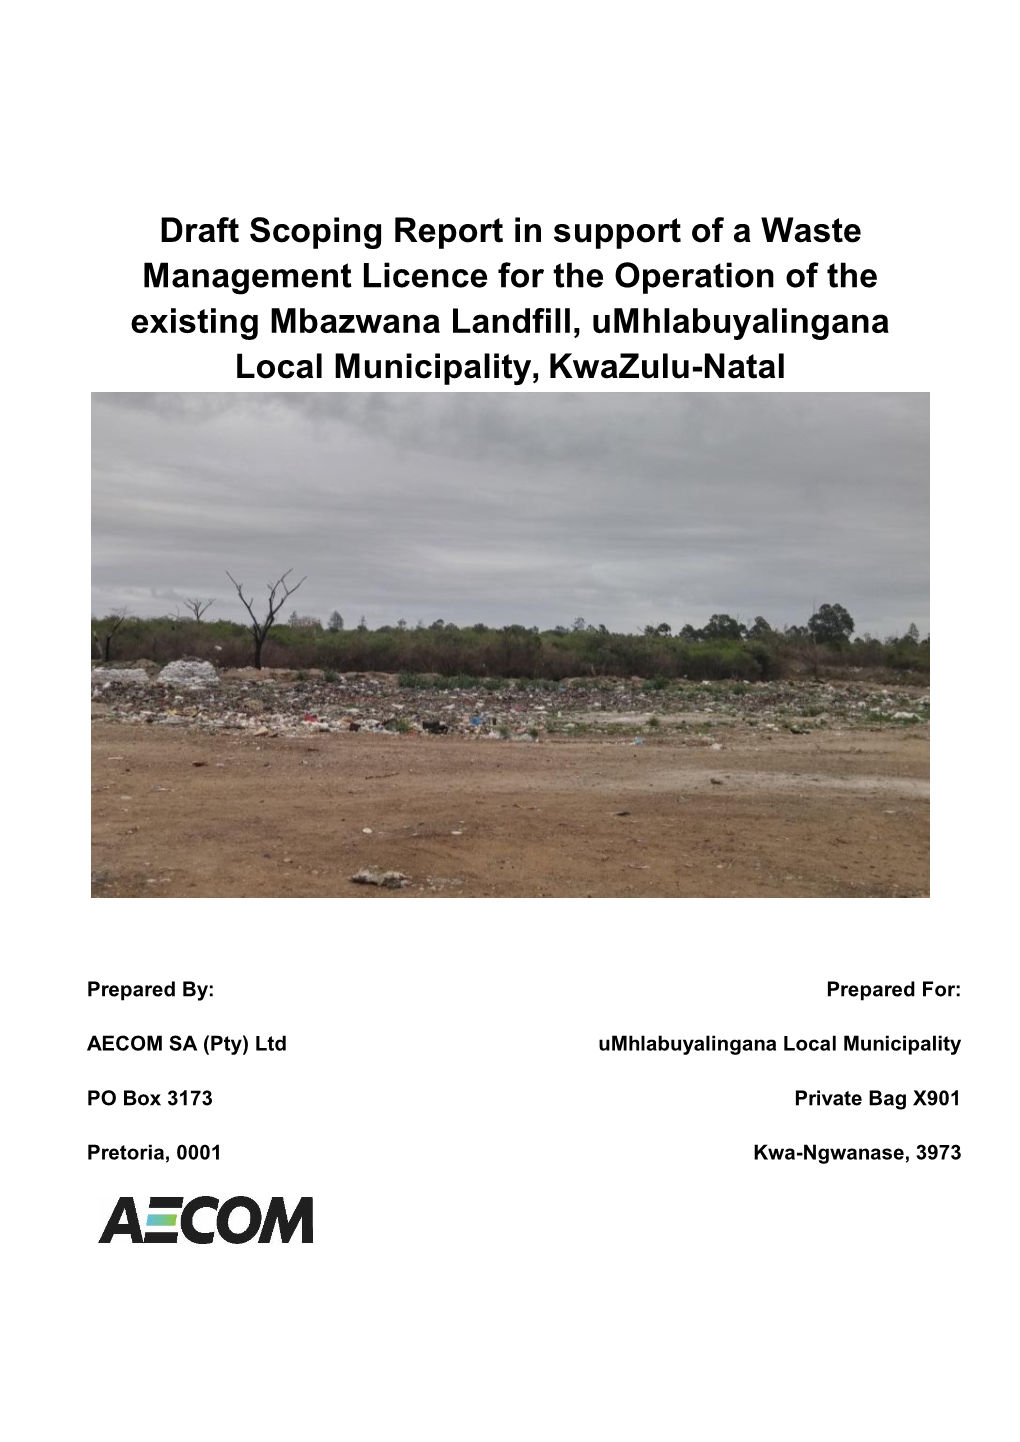 Draft Scoping Report in Support of a Waste Management Licence for the Operation of the Existing Mbazwana Landfill, Umhlabuyalingana Local Municipality, Kwazulu-Natal